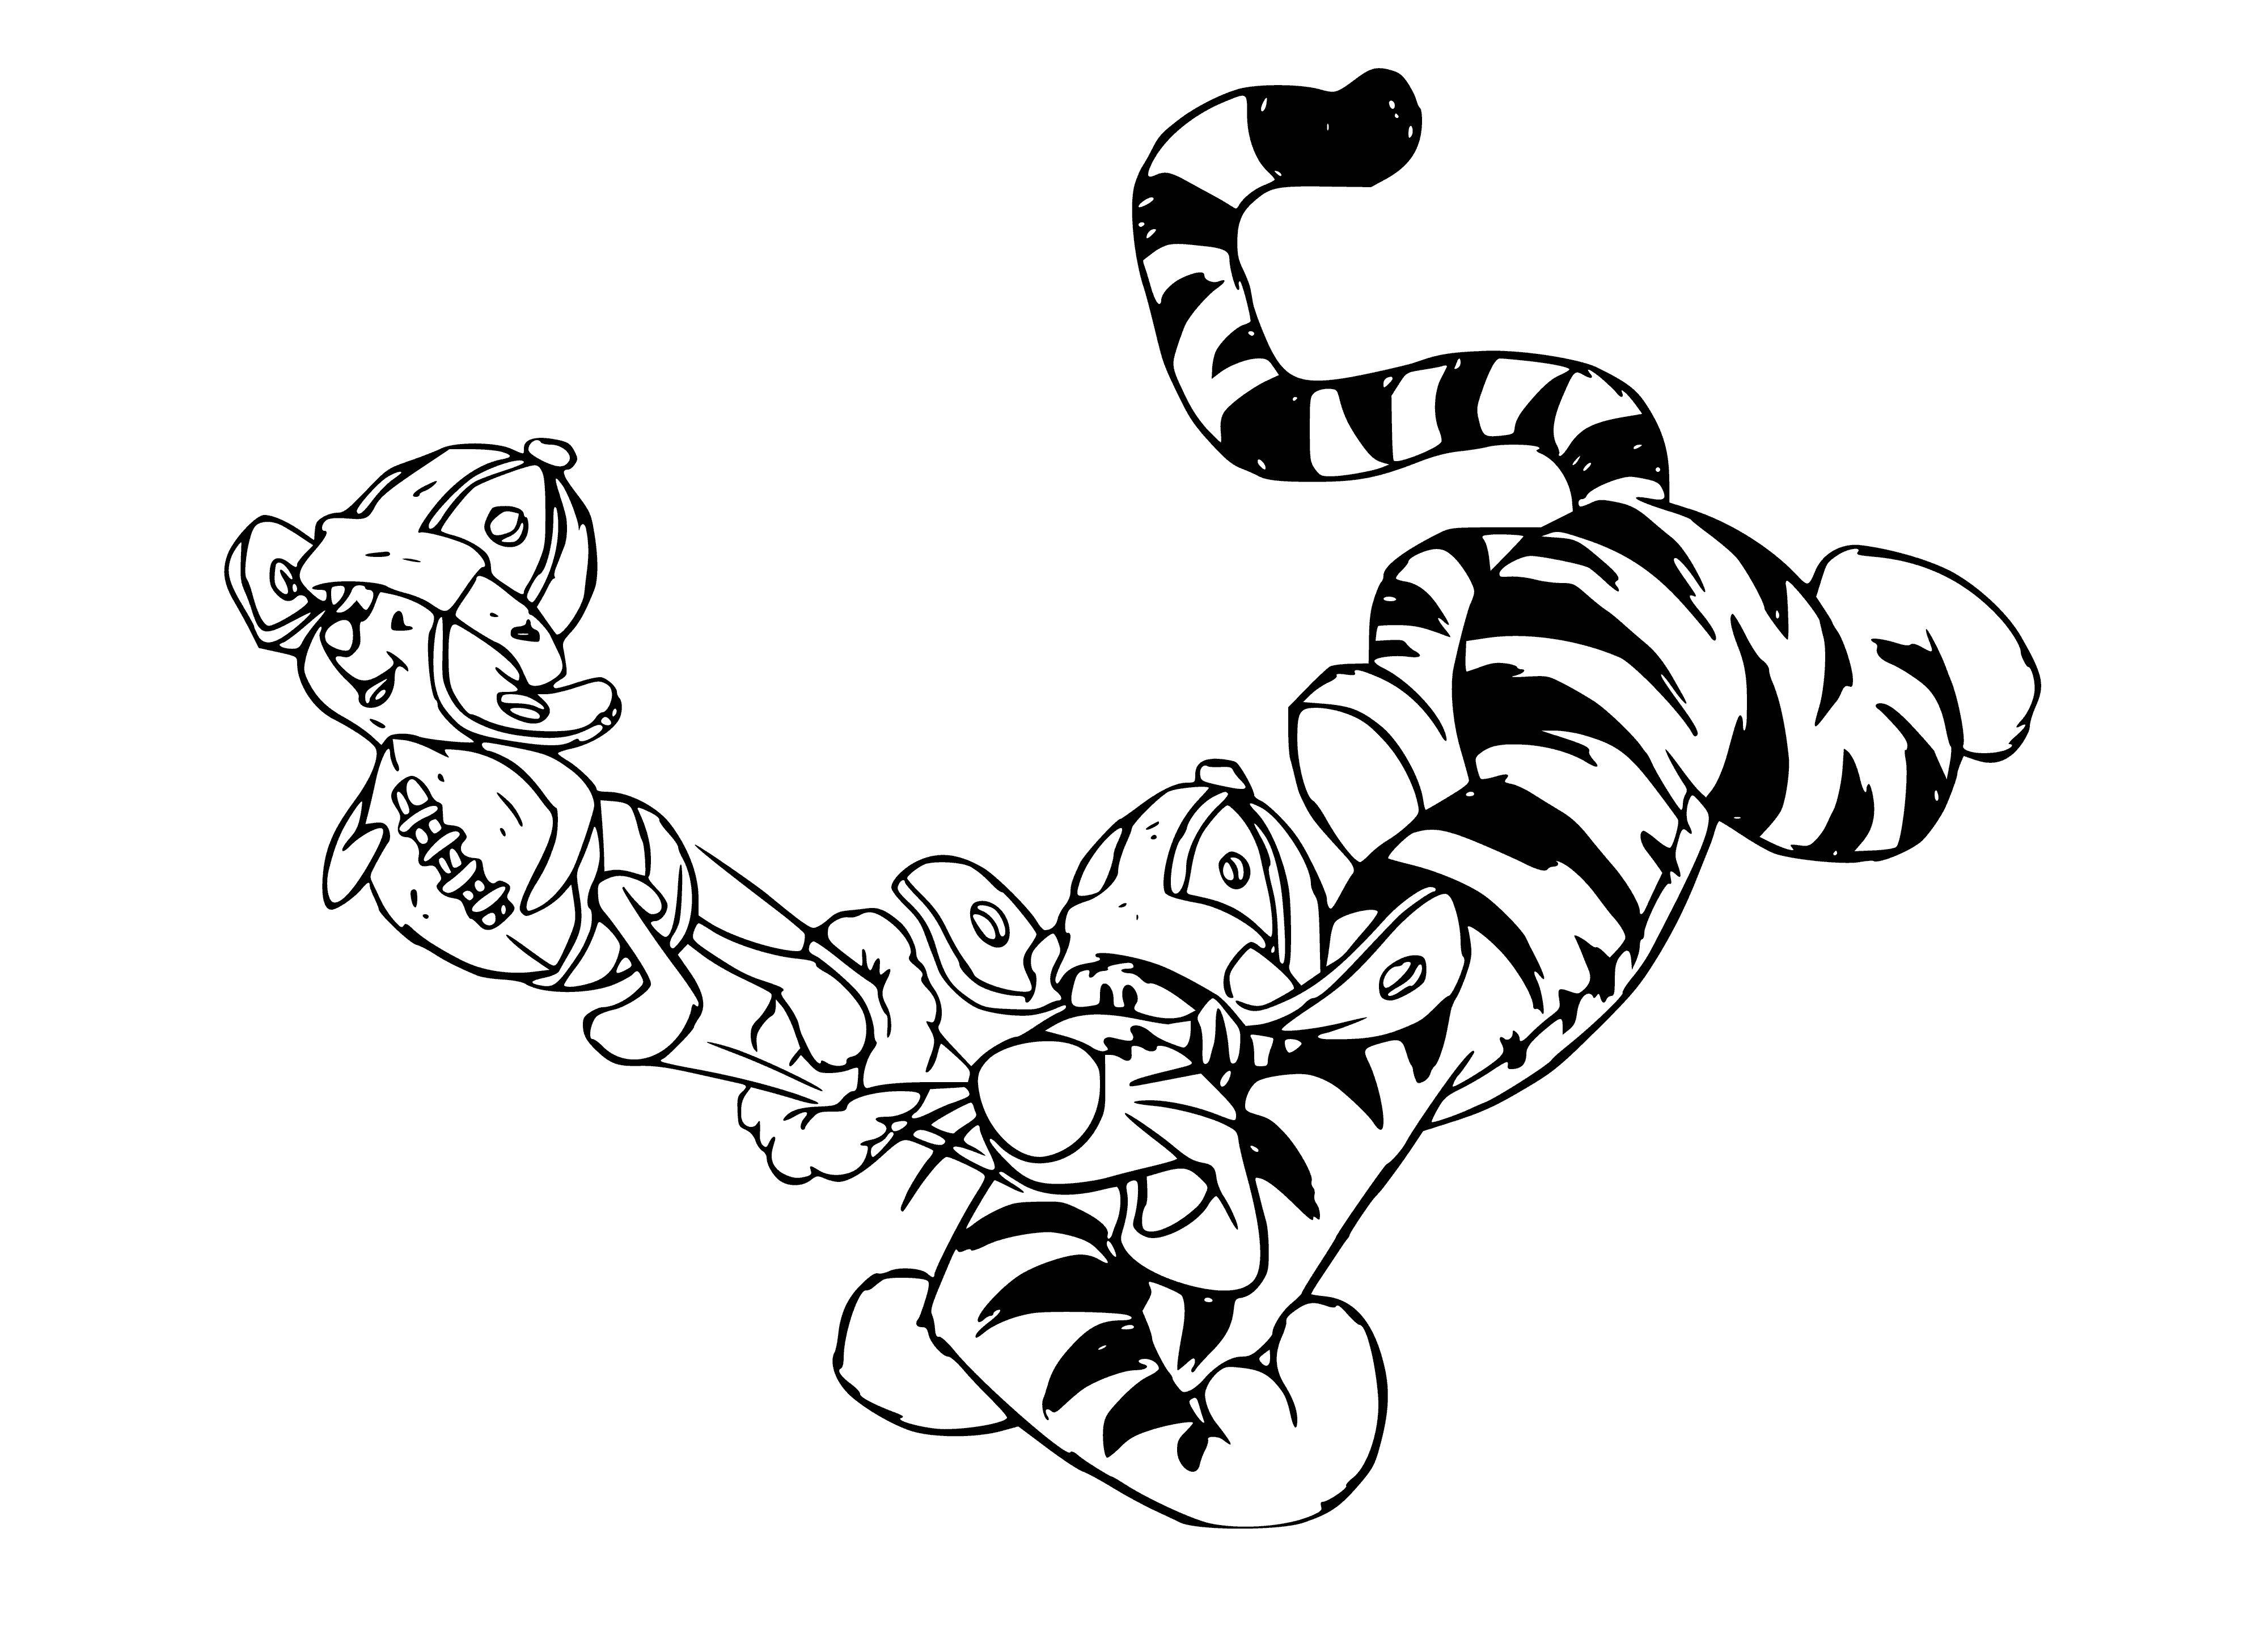 coloring page: Small yellow baby kangaroo meets friendly orange tiger in tall grass, tail straight up in the air in a friendly smile.